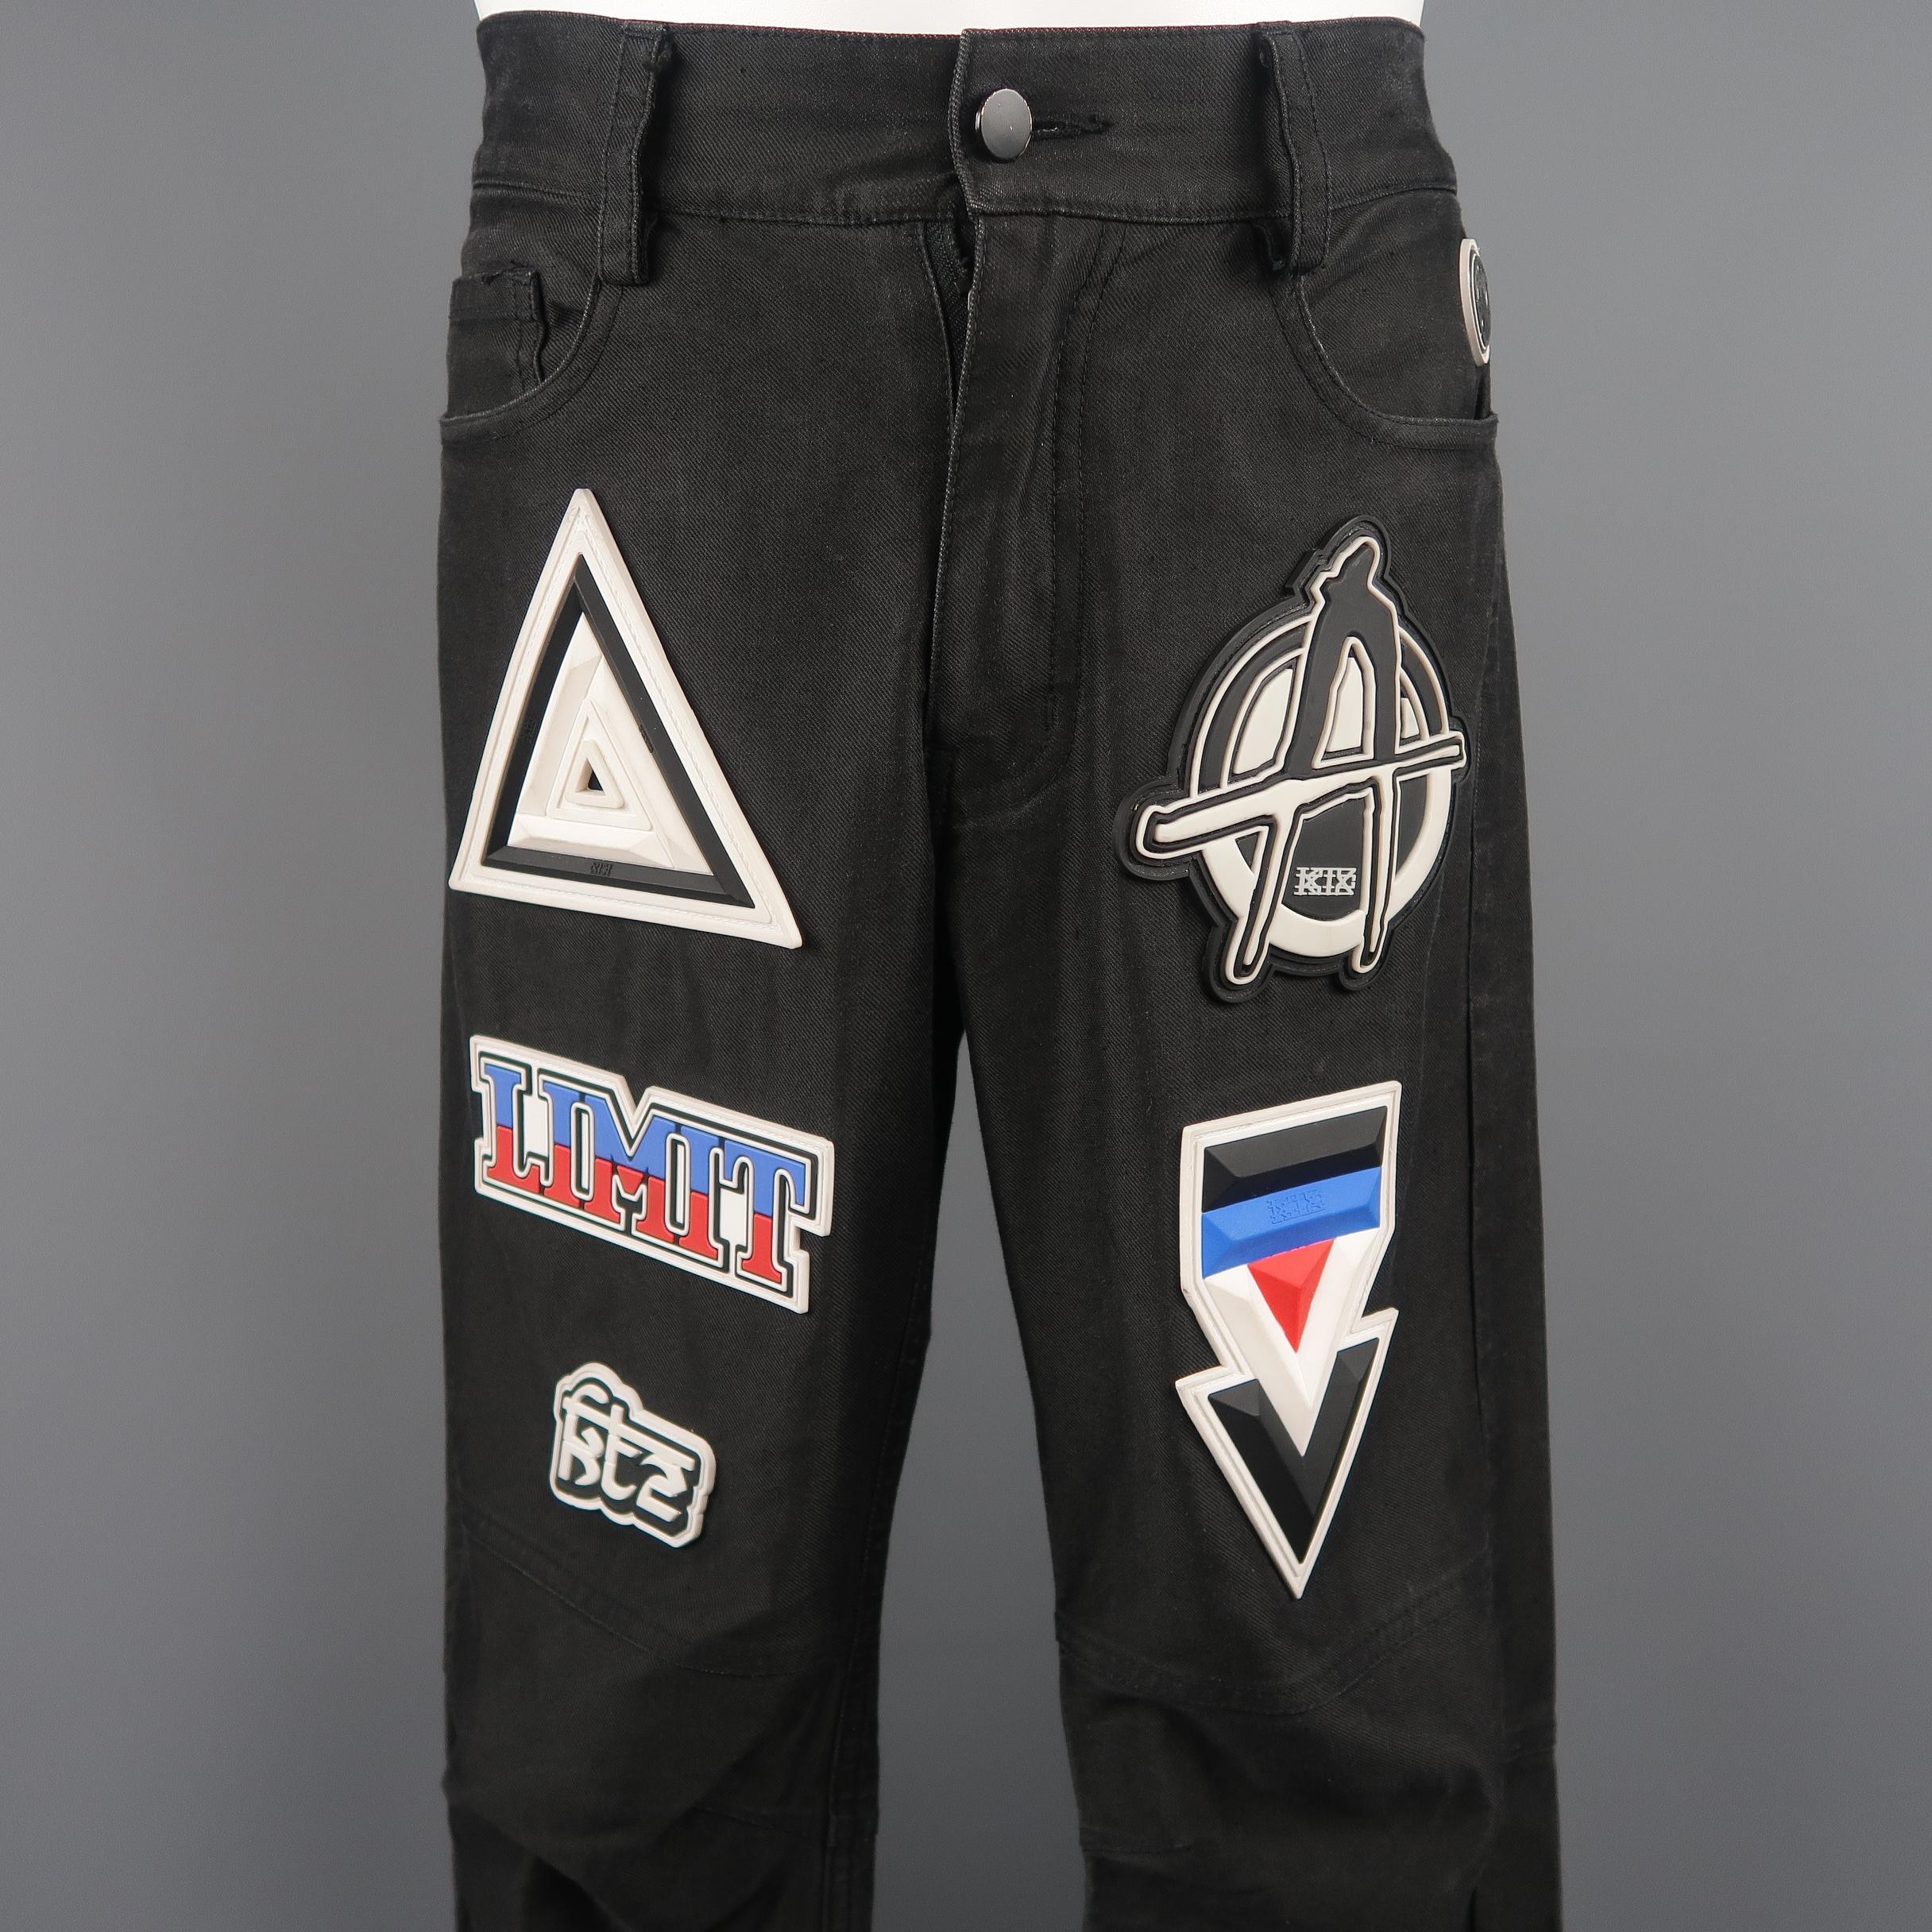 KTZ pants come in black cotton twill darted knees and rubber motocross pant appliques. Minor wear.
Good Pre-Owned Condition.
Marked: M
 
Measurements: 
Waist: 35 in.
Rise: 10 in.
Inseam: 32 in.